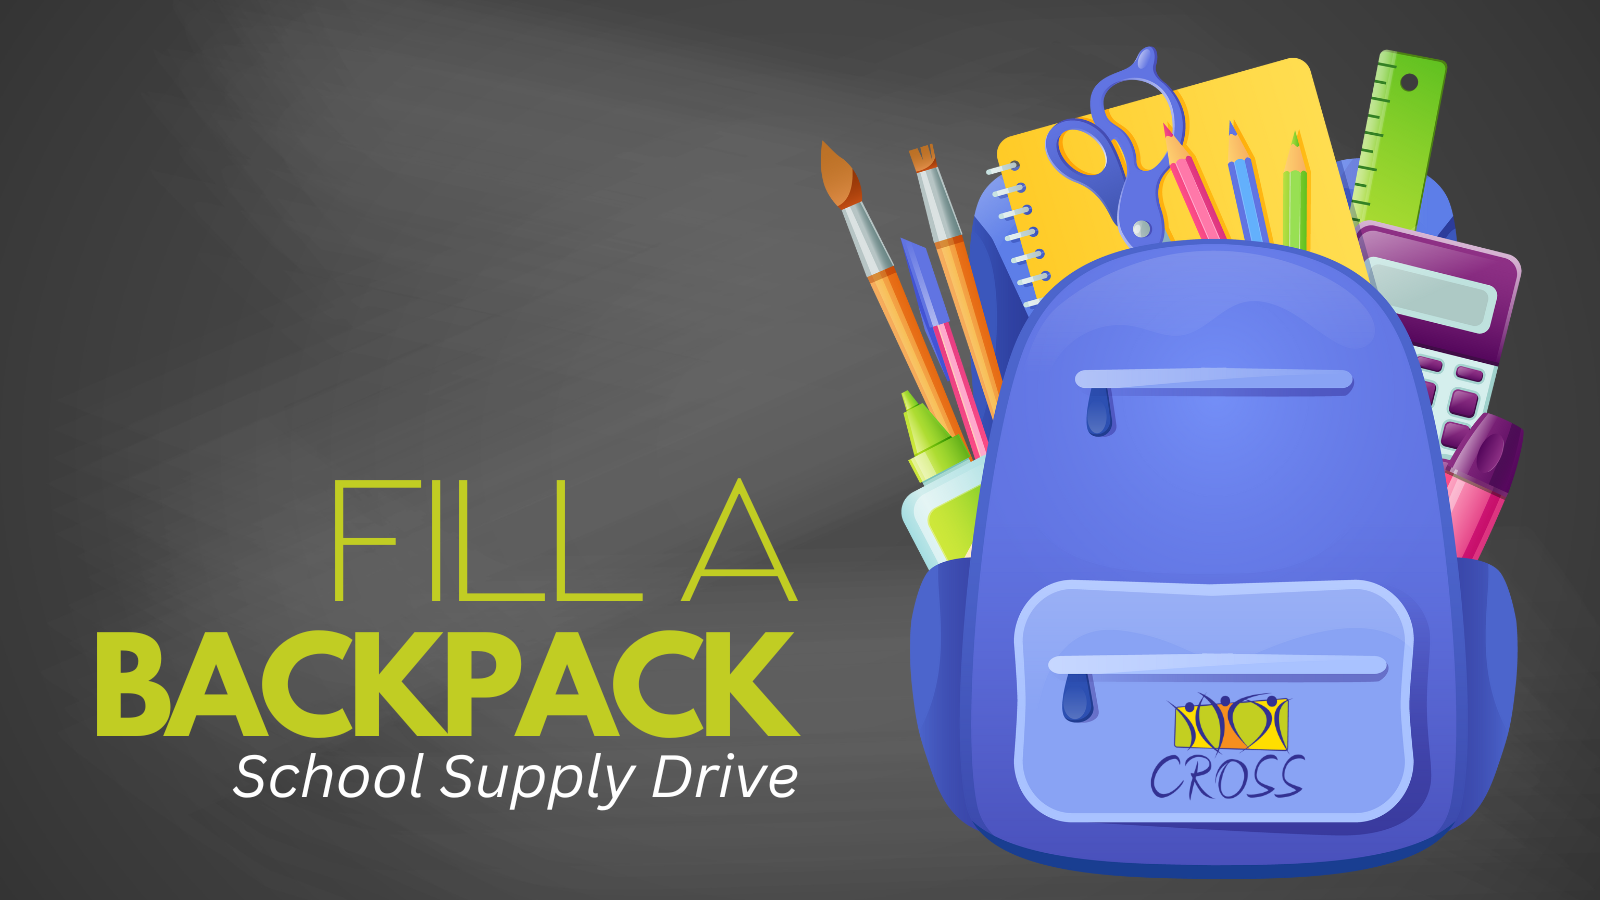 Fill a backpack school supply drive